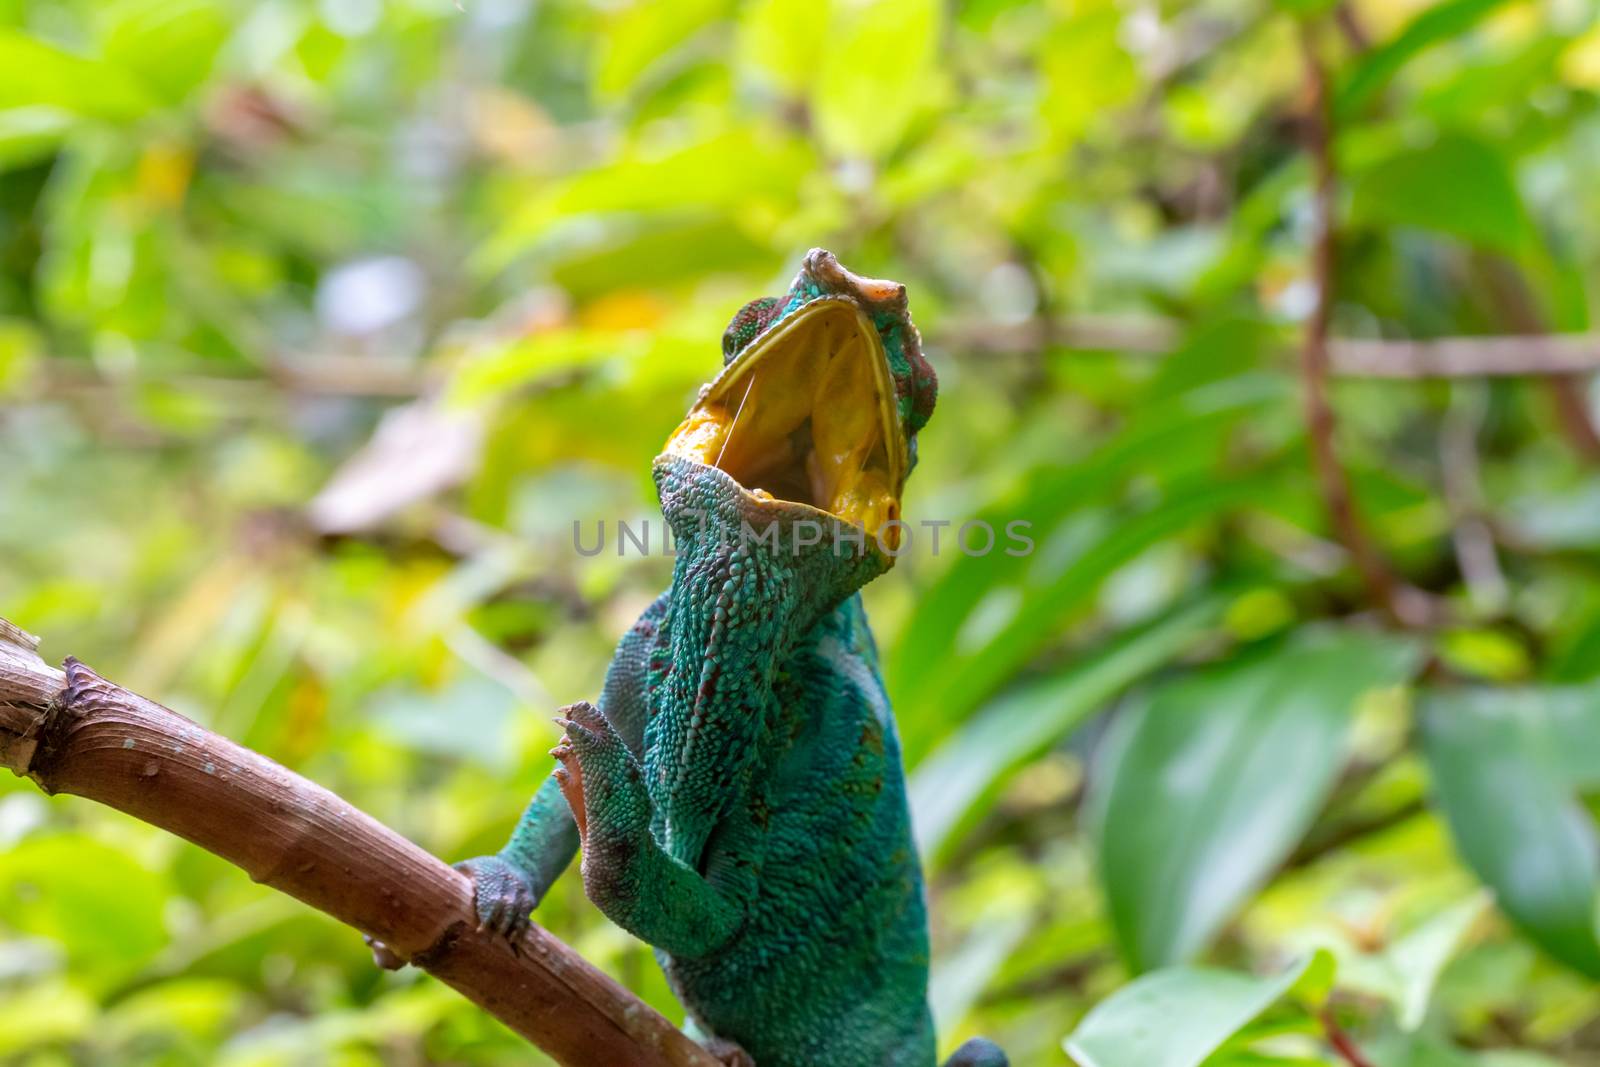 A chameleon on a branch in the rainforest of Madagascar by 25ehaag6